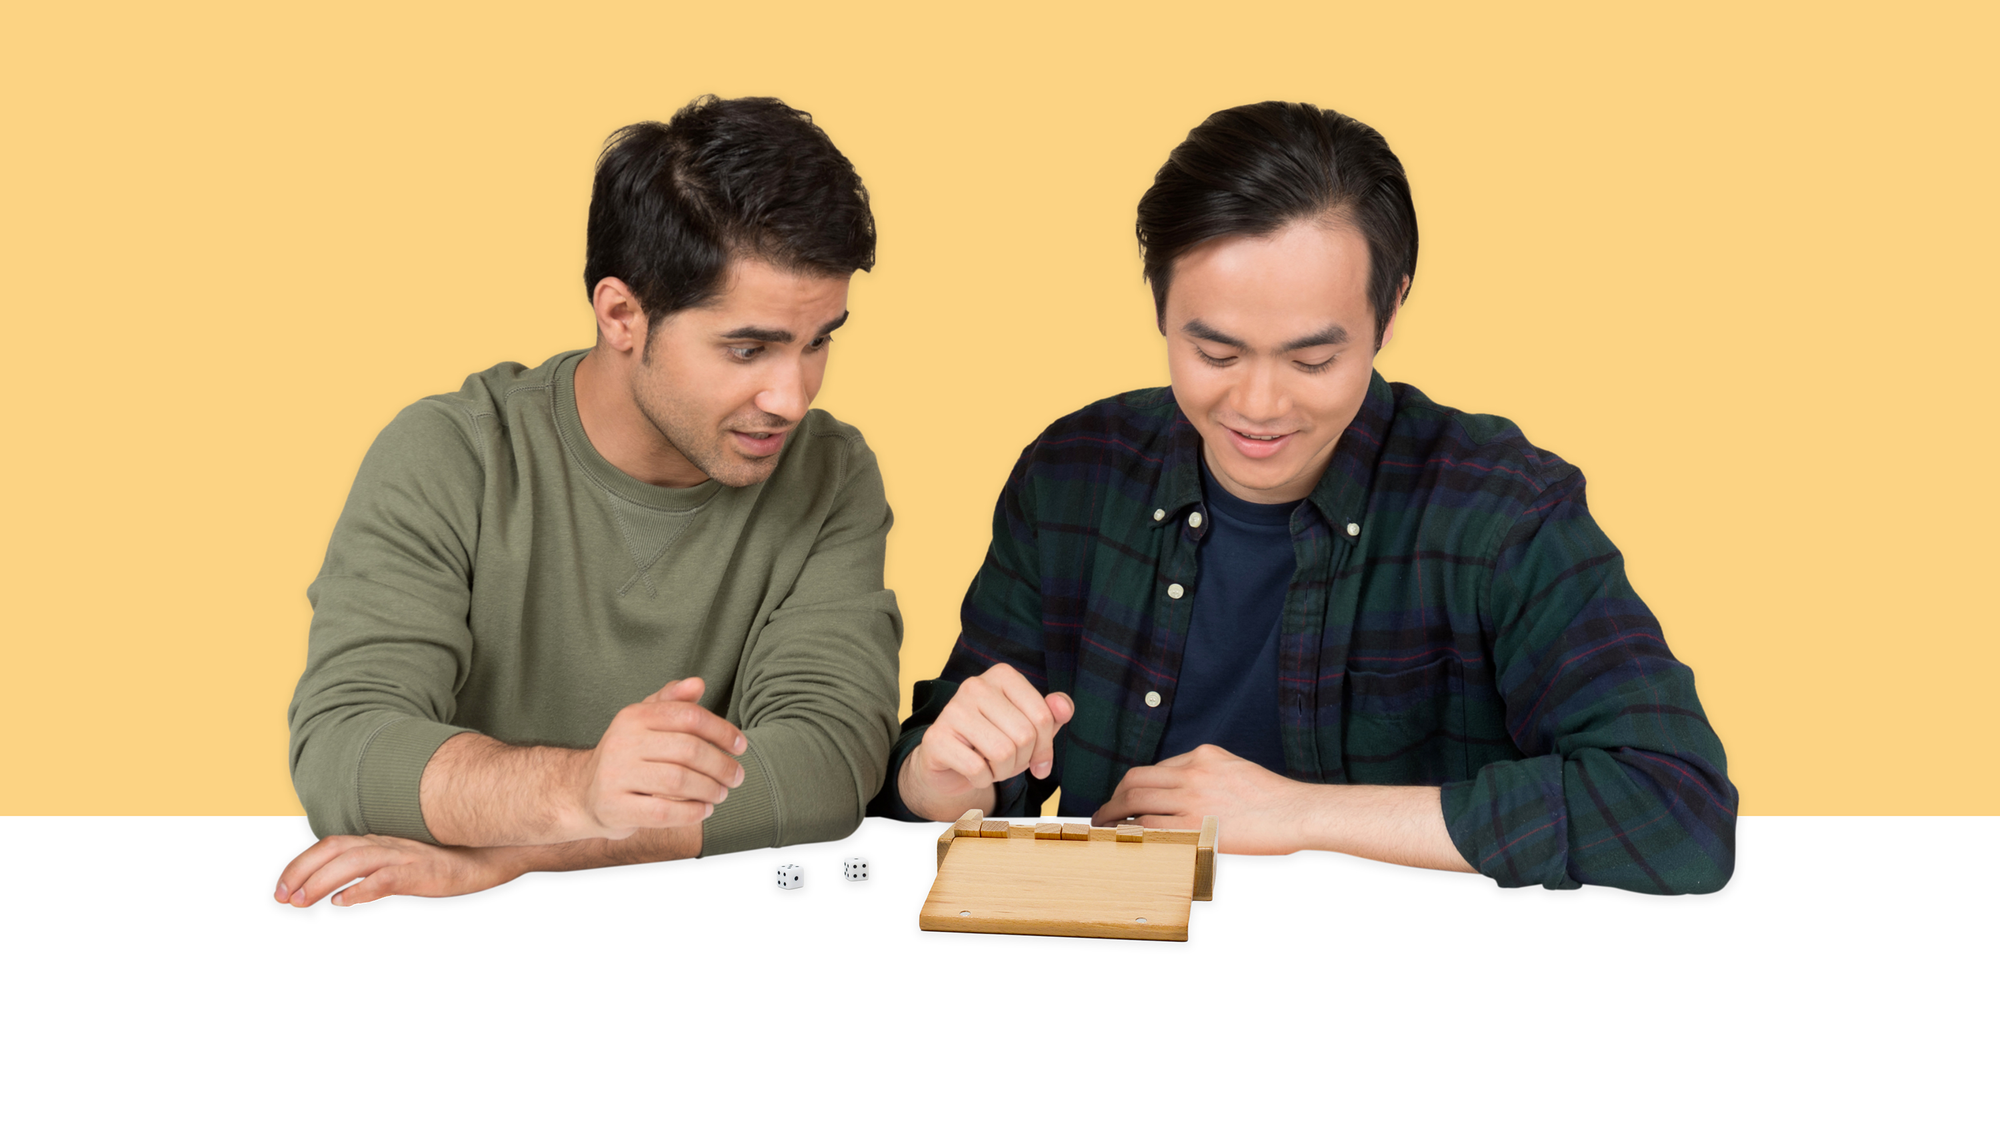 Image of one man playing an open game of Shut the Box by Velocity Promotions while another man watches him